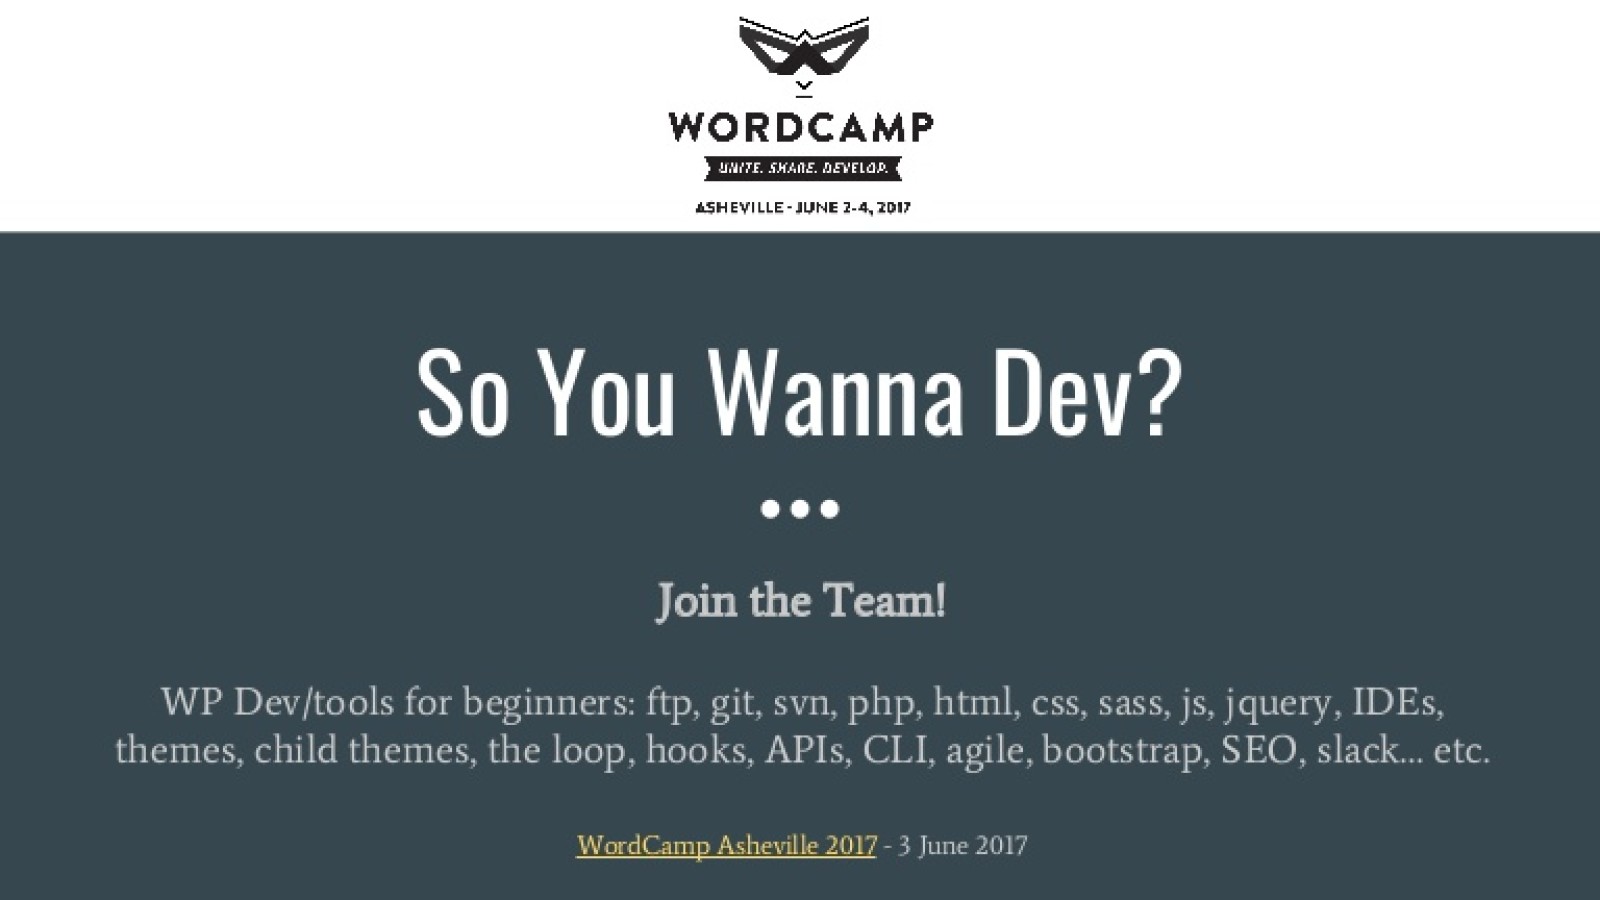 WP Development for Beginners: So, You Wanna Dev? Join the Team!